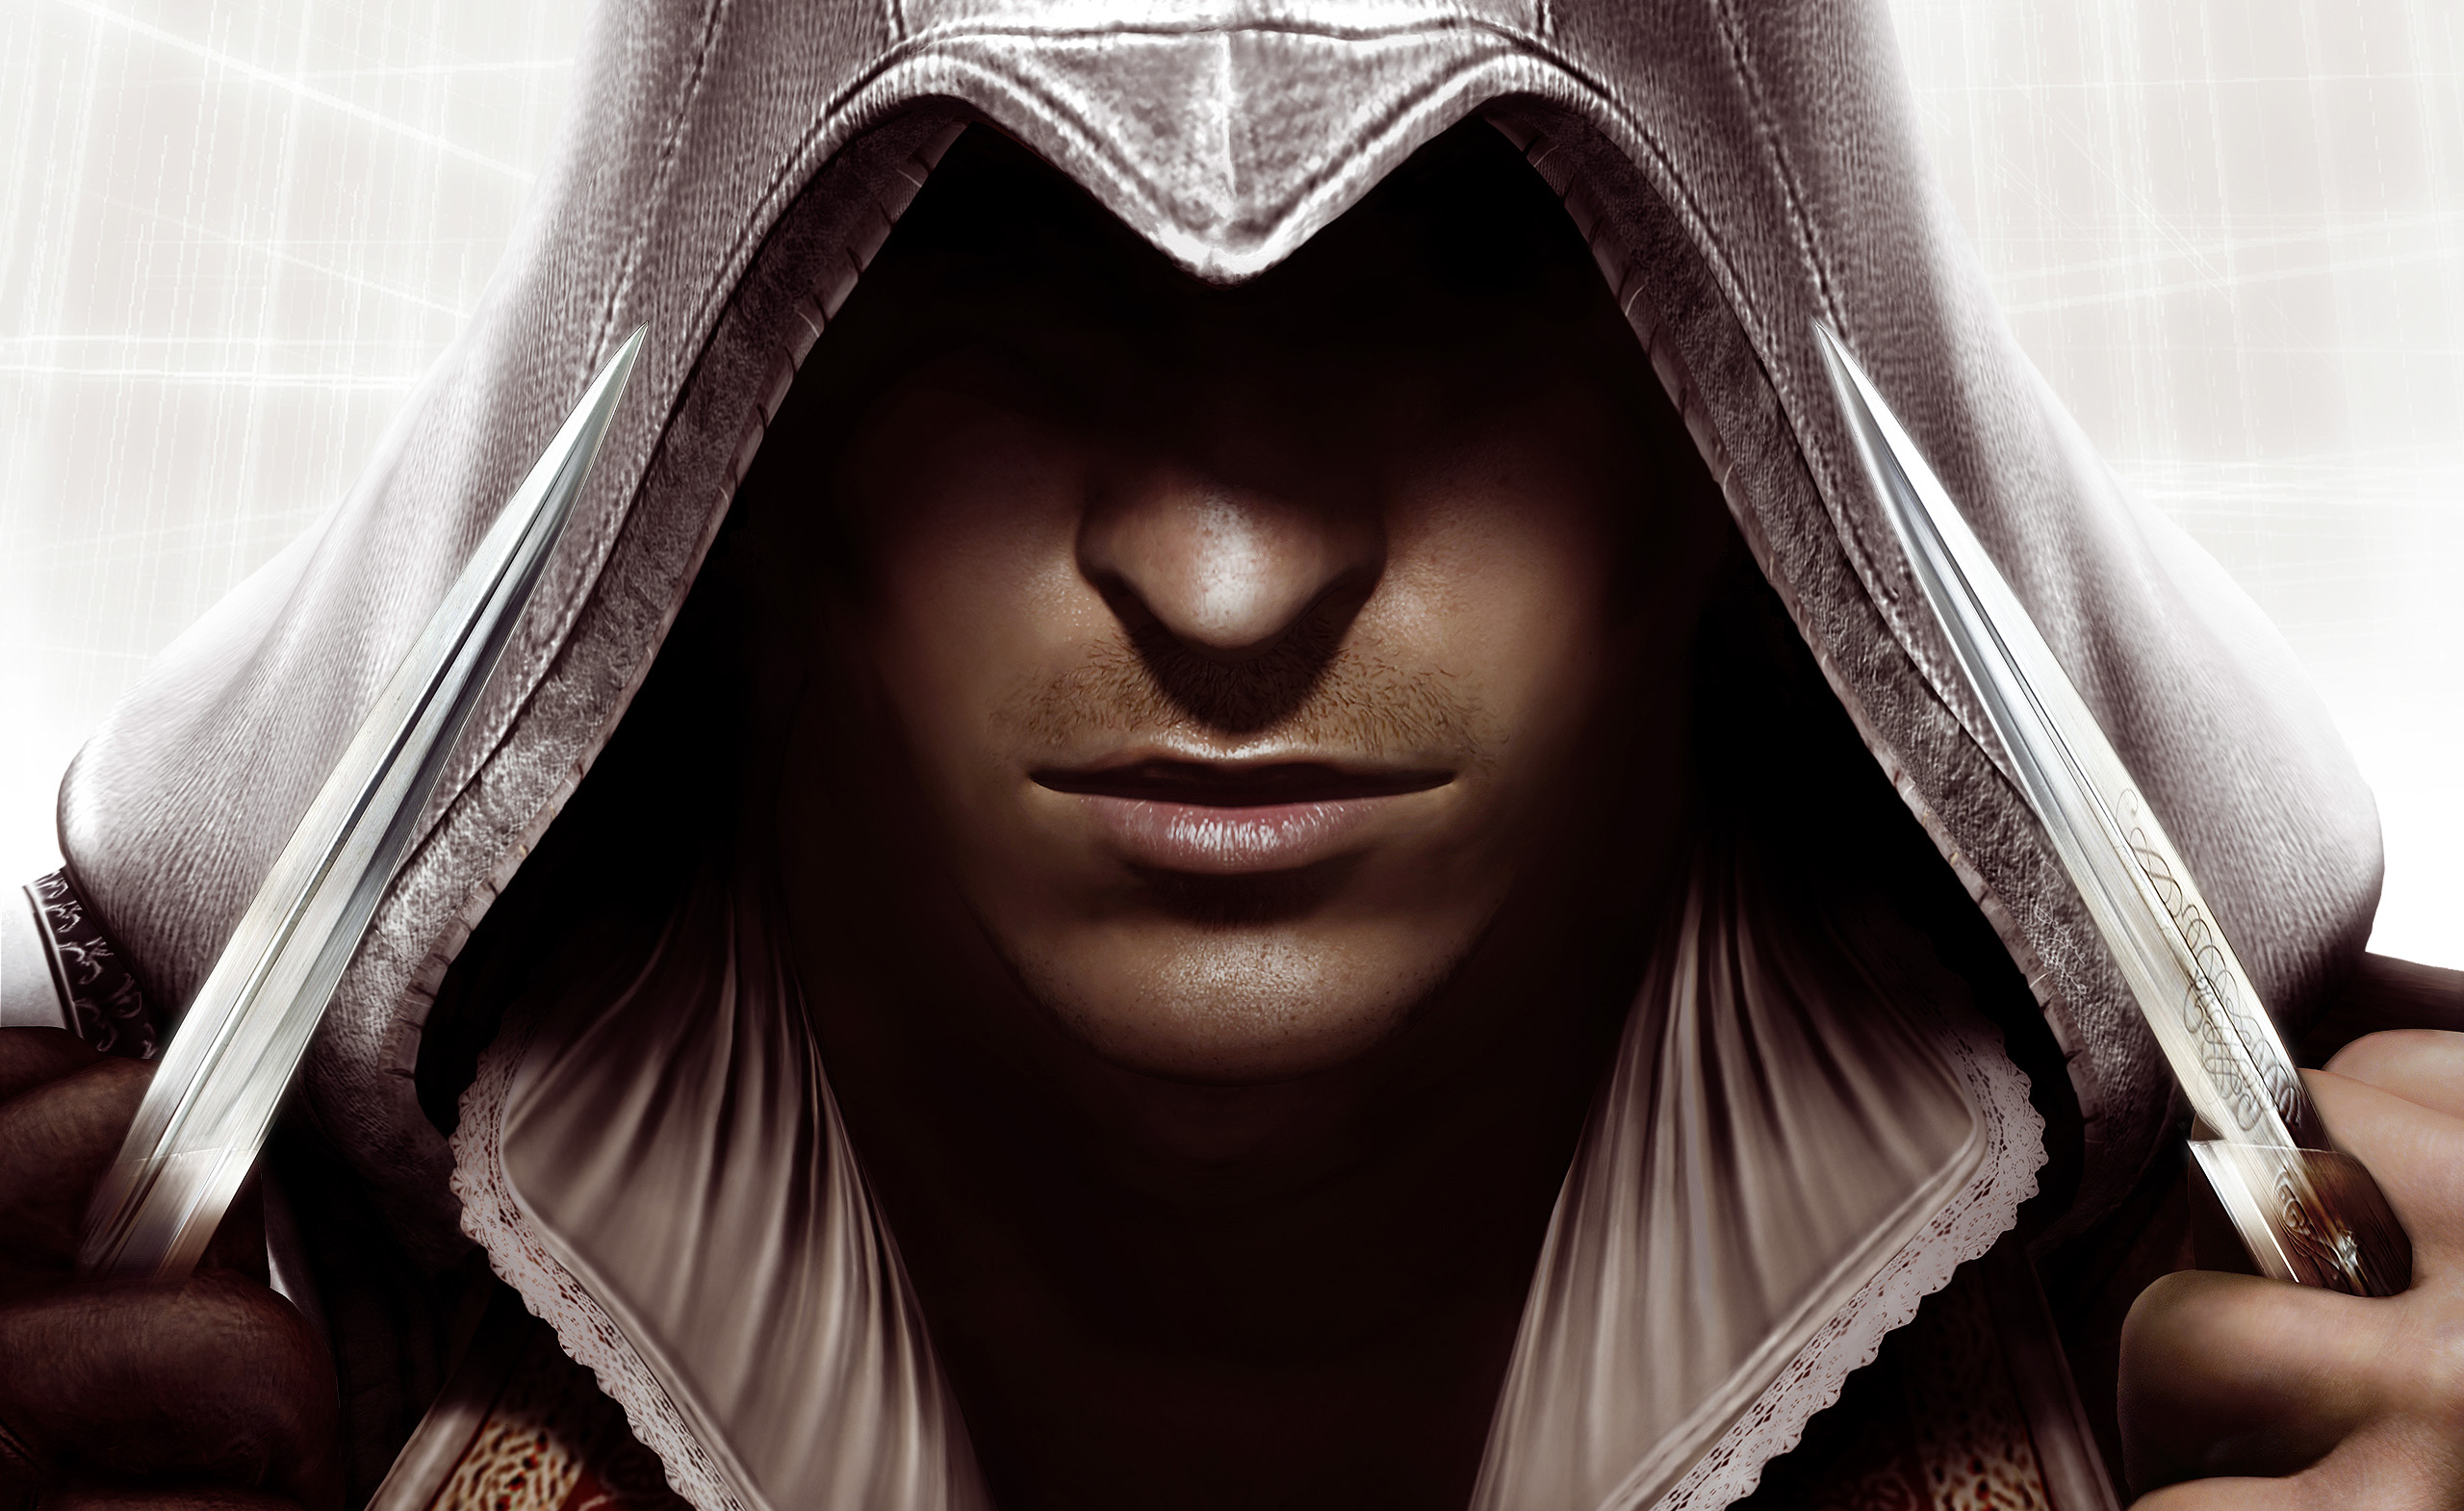 assassin's creed ii, video game, assassin's creed